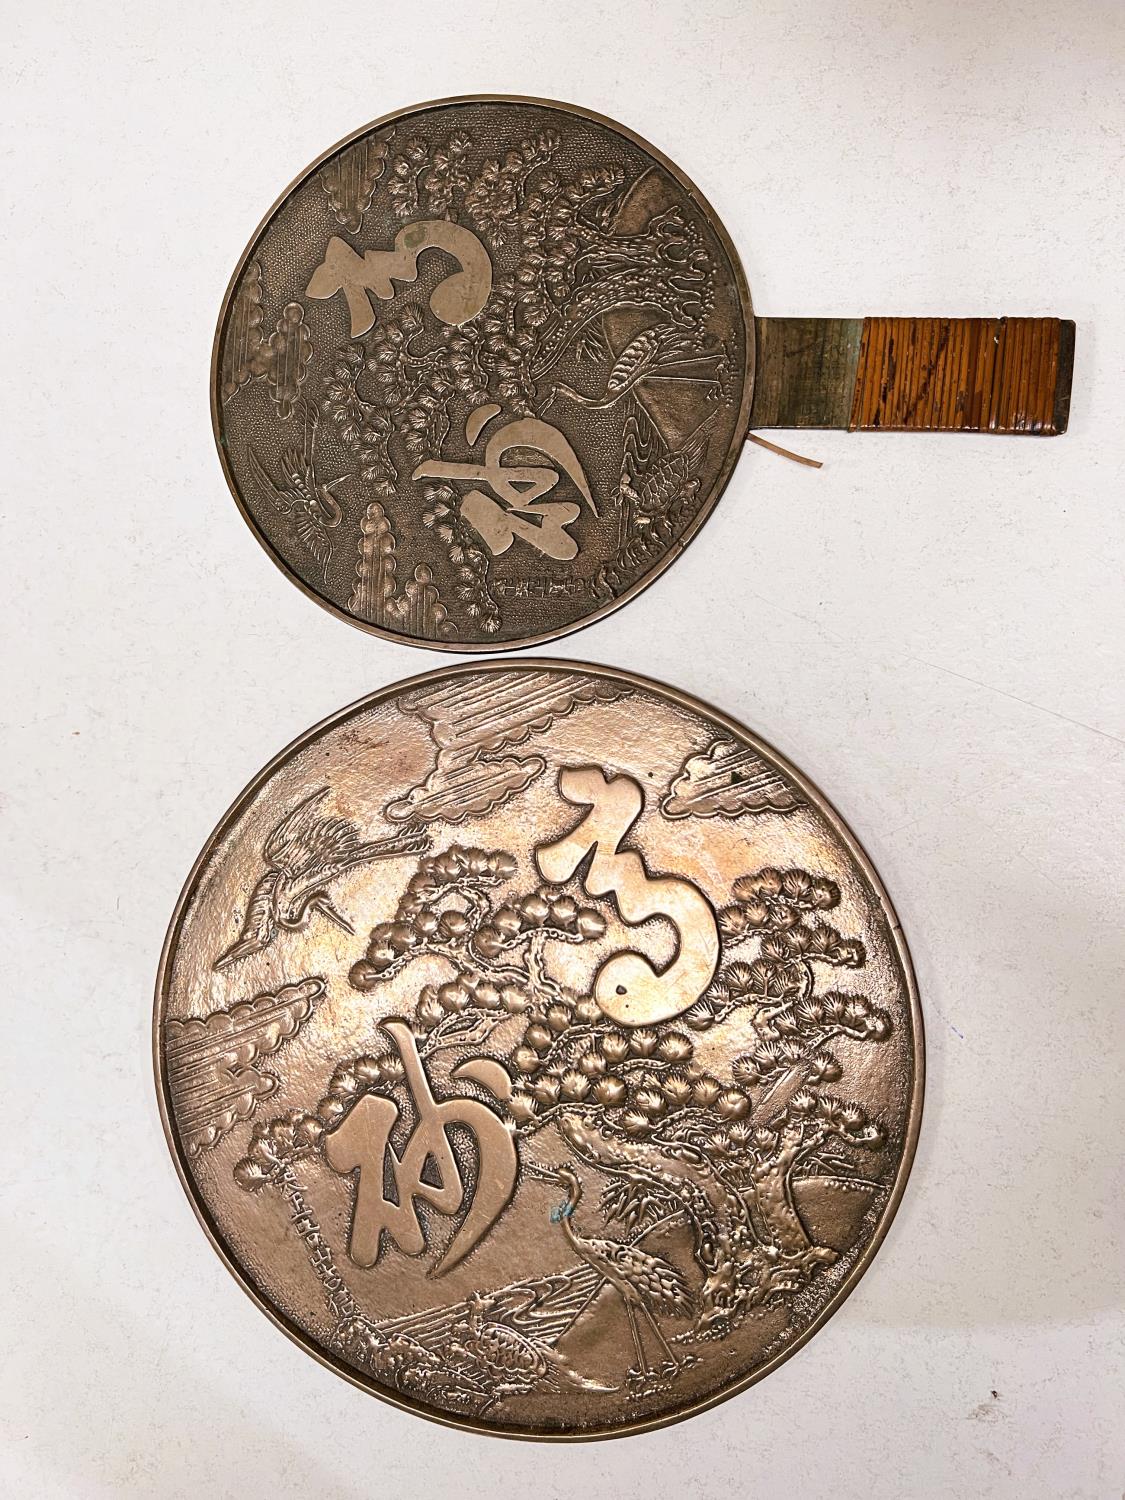 Two Chinese bronze mirrors, one highly polished side, the other embossed, one with handle - Image 2 of 2